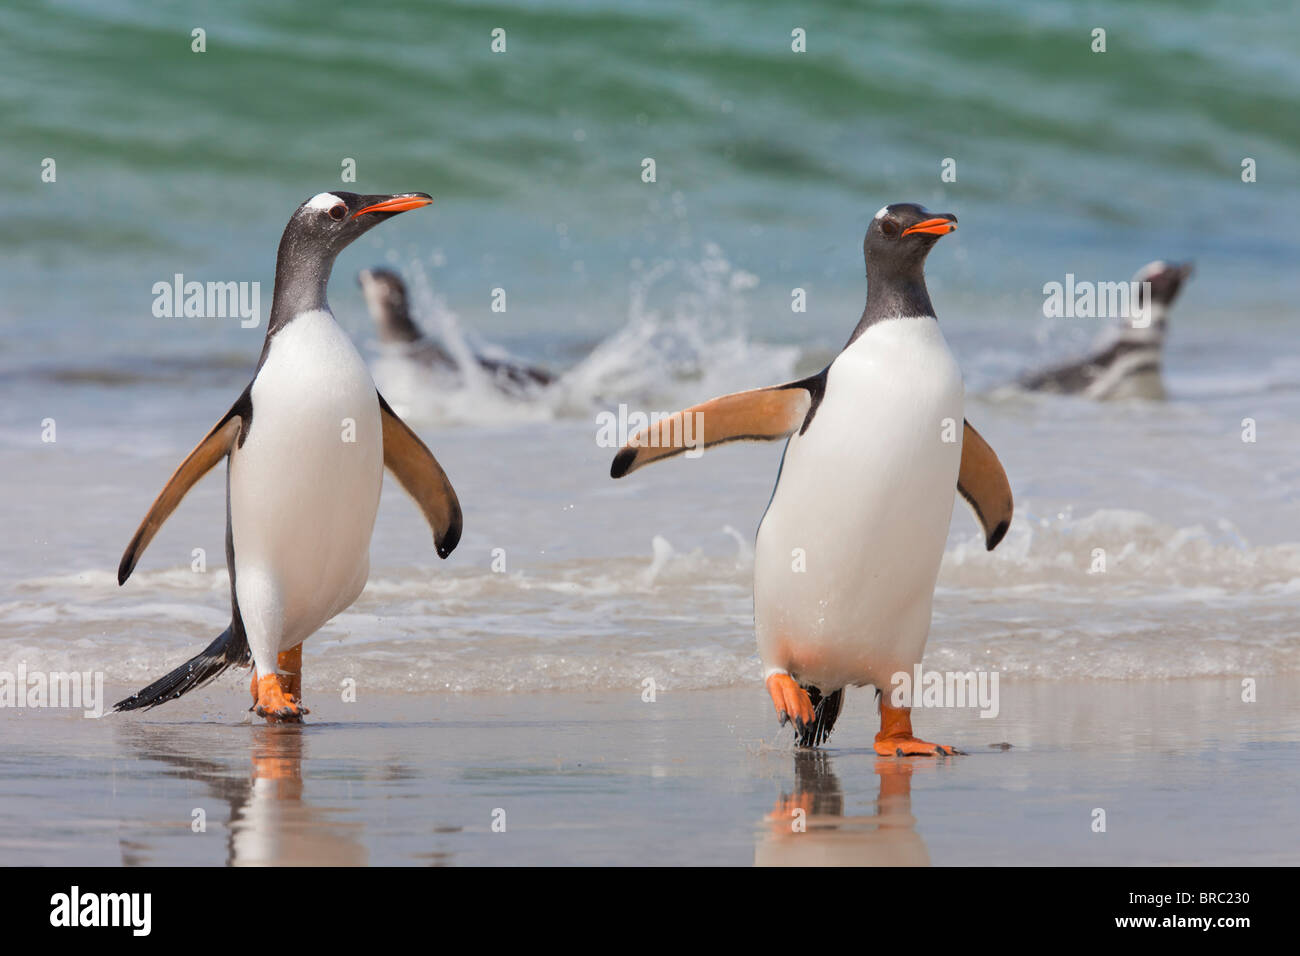 2 Gentoo penguins coming ashore, after foraging at sea. They feed on fish and crustaceans. New Island, Falkland Islands, UK Stock Photo